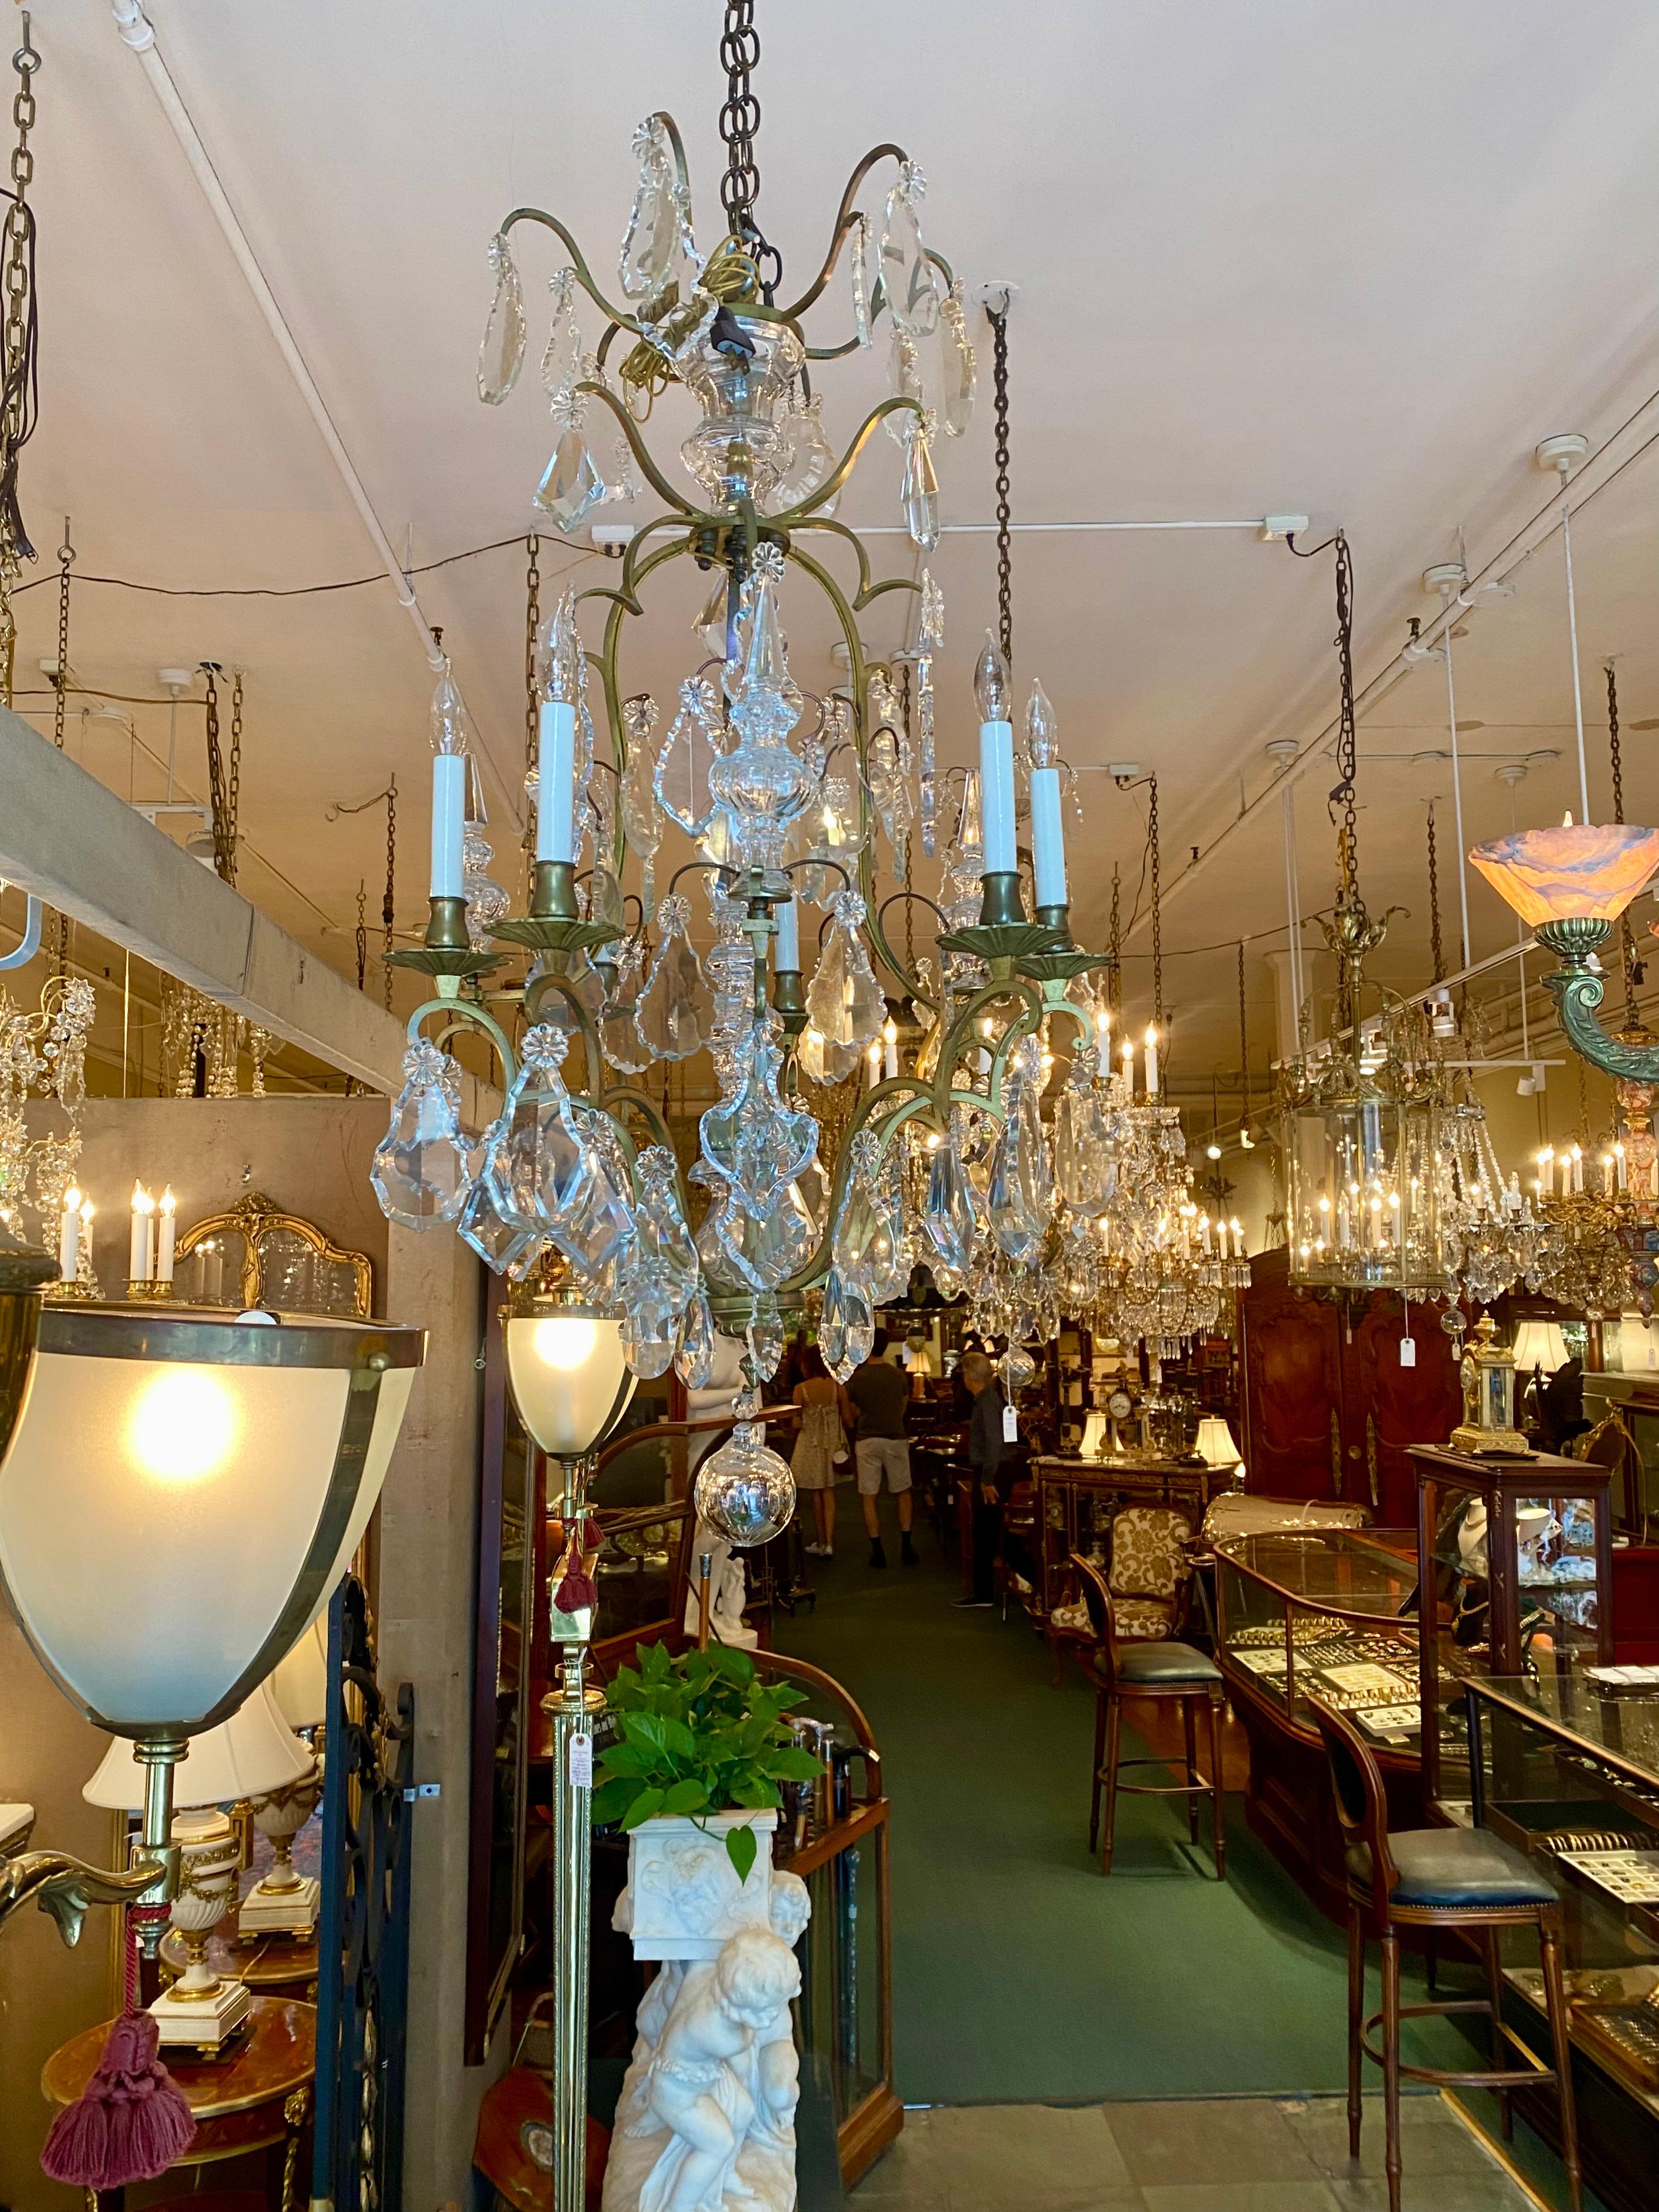 Antique French Baccarat Crystal and Bronze D' Ore Chandelier, circa 1880-1890 For Sale 1